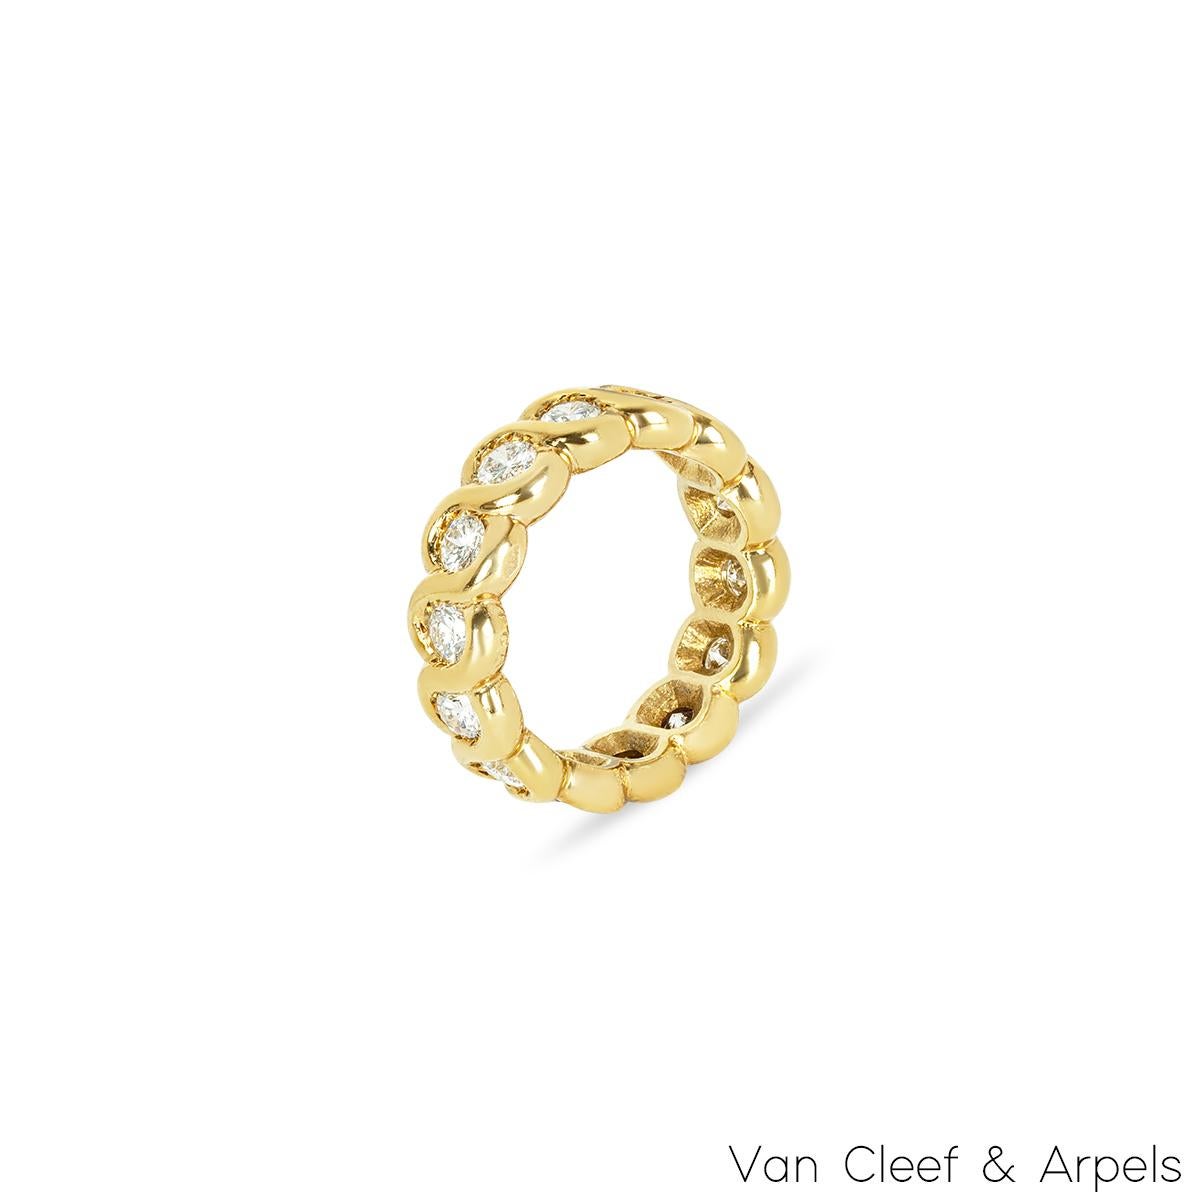 A beautiful 18k yellow gold Van Cleef & Arpels diamond eternity ring. The ring comprises of 14 round brilliant cut diamonds in a rubover setting, set all the way around the ring. The diamonds have a total weight of 1.40ct,, G colour and VS clarity.